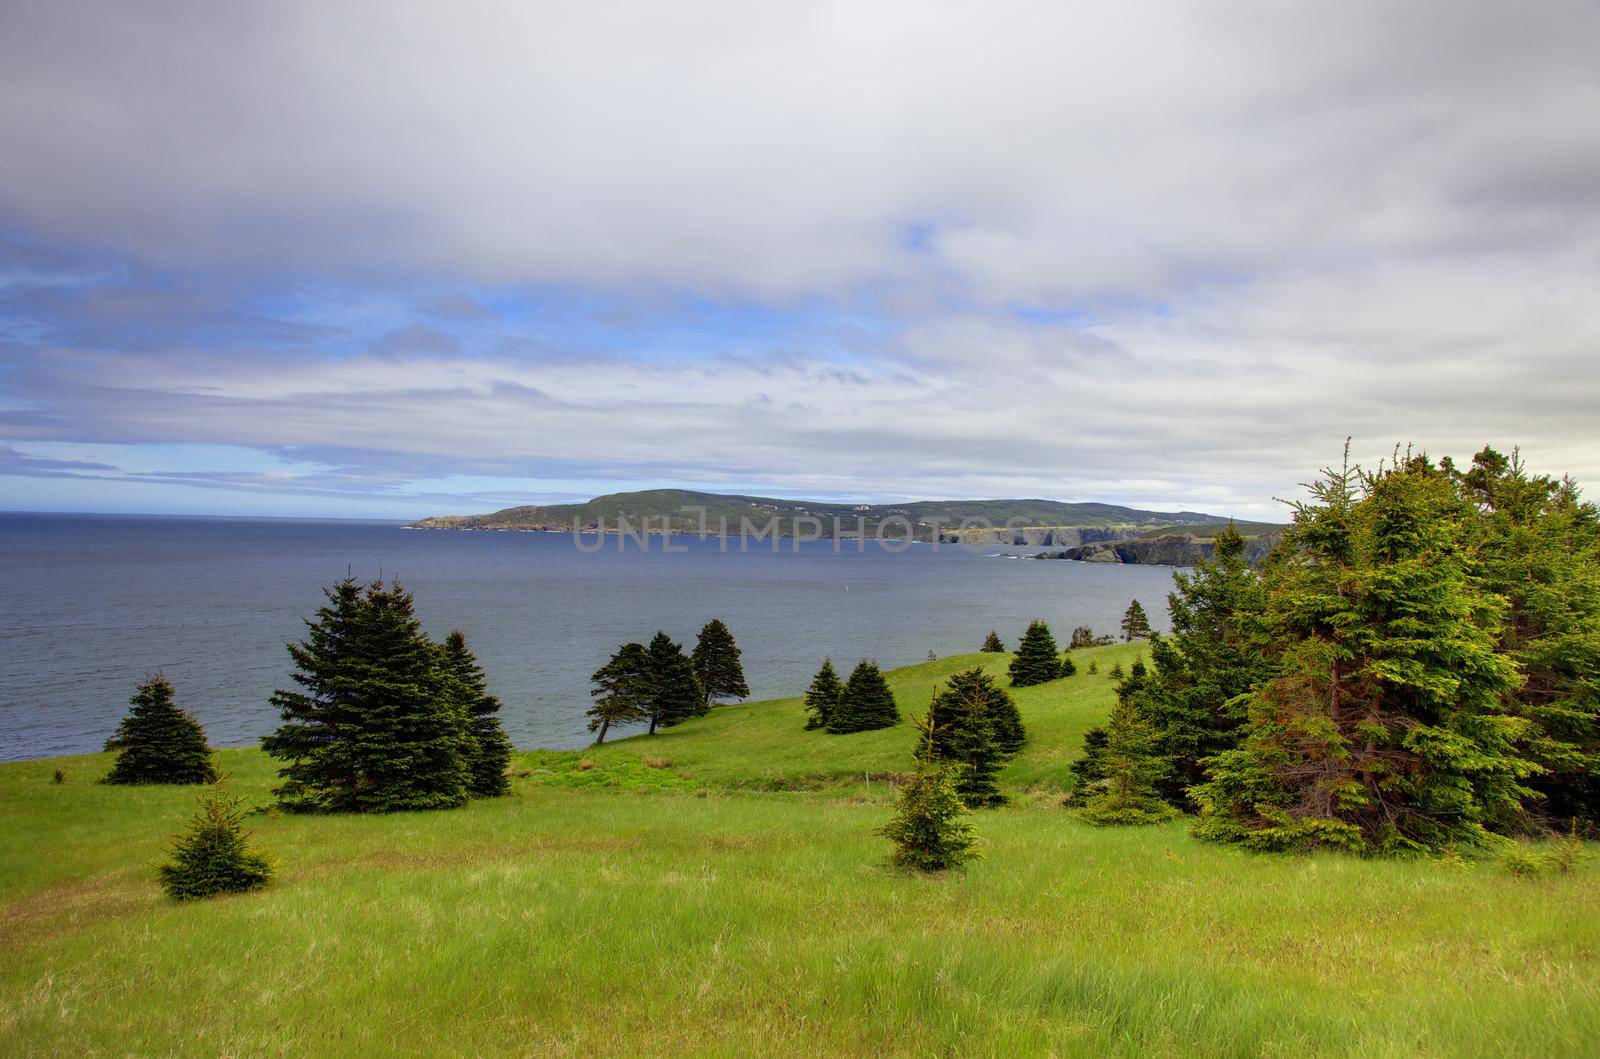 view from a green space with trees looking out to ocean, on newfoundland's east coast trail